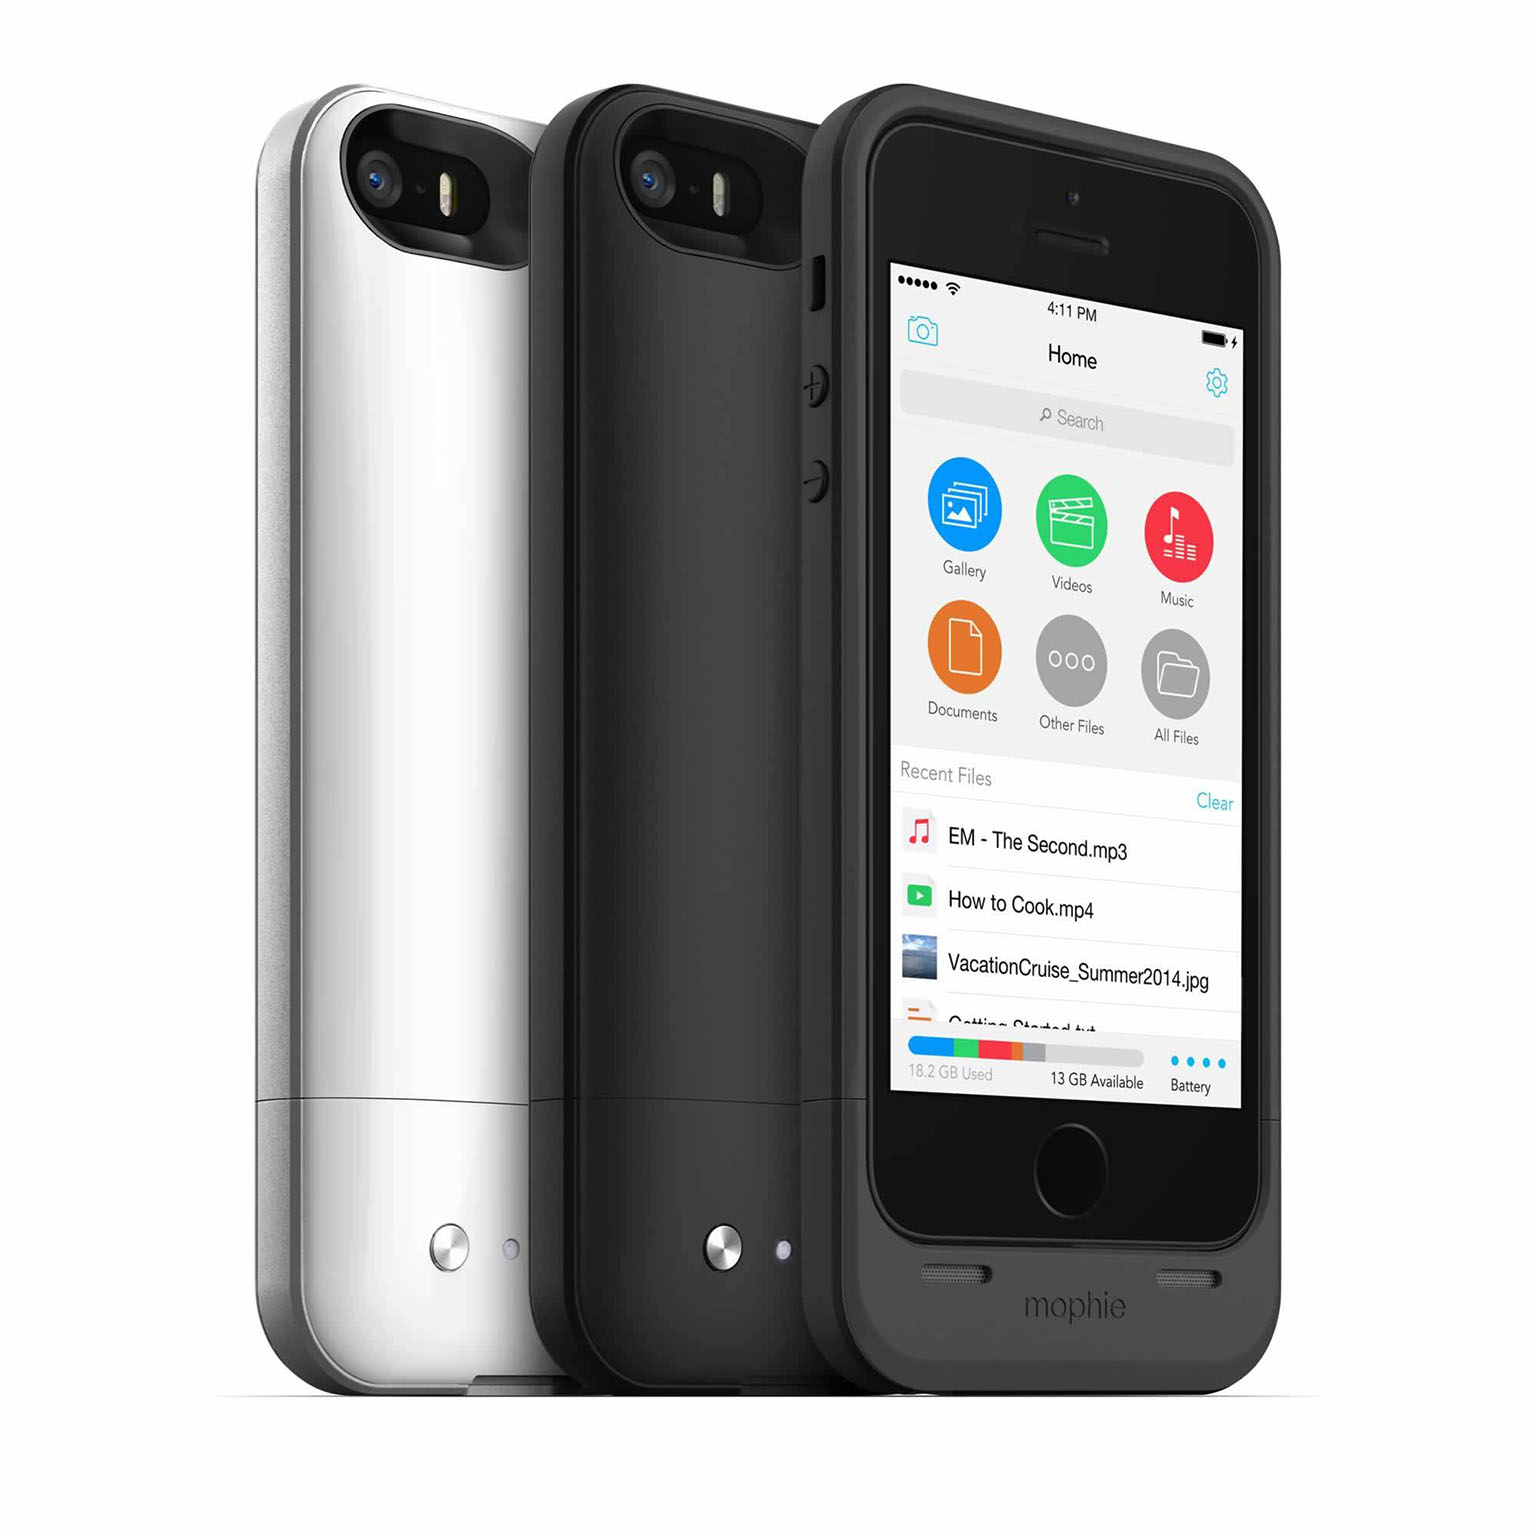 Mophie offers iPhone battery pack case with storage and more at CES